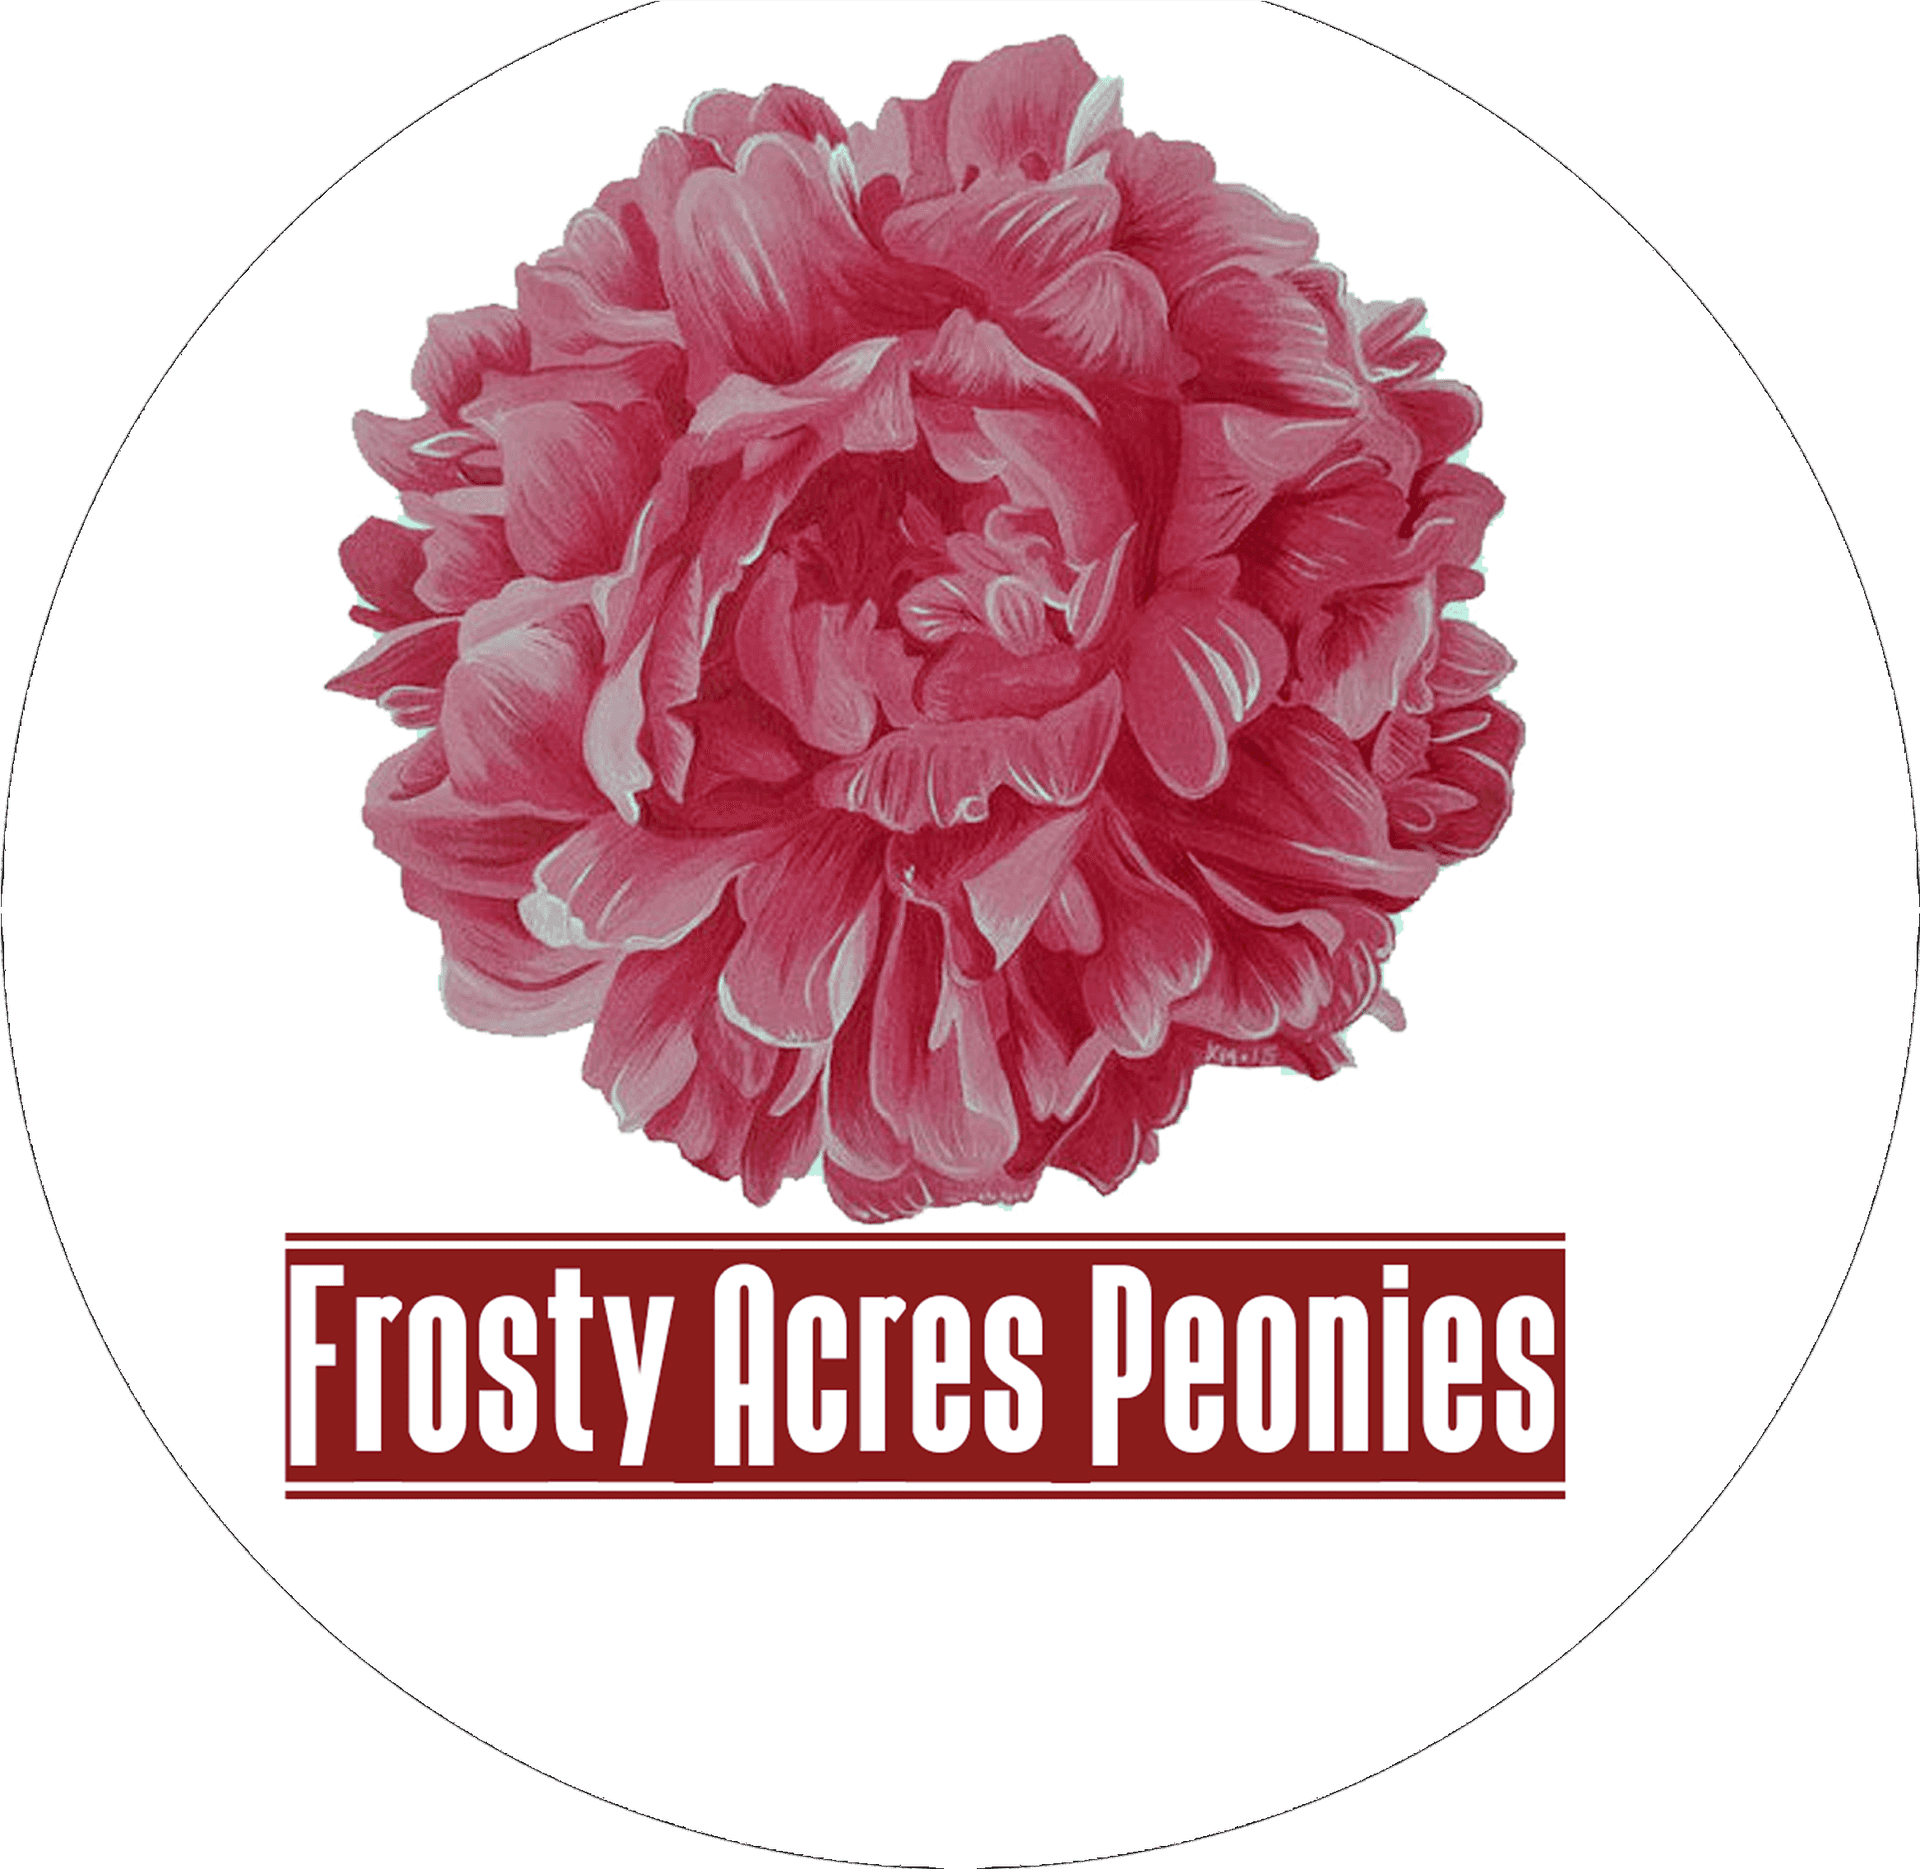 Frosty Acres Peonies Logo PNG image